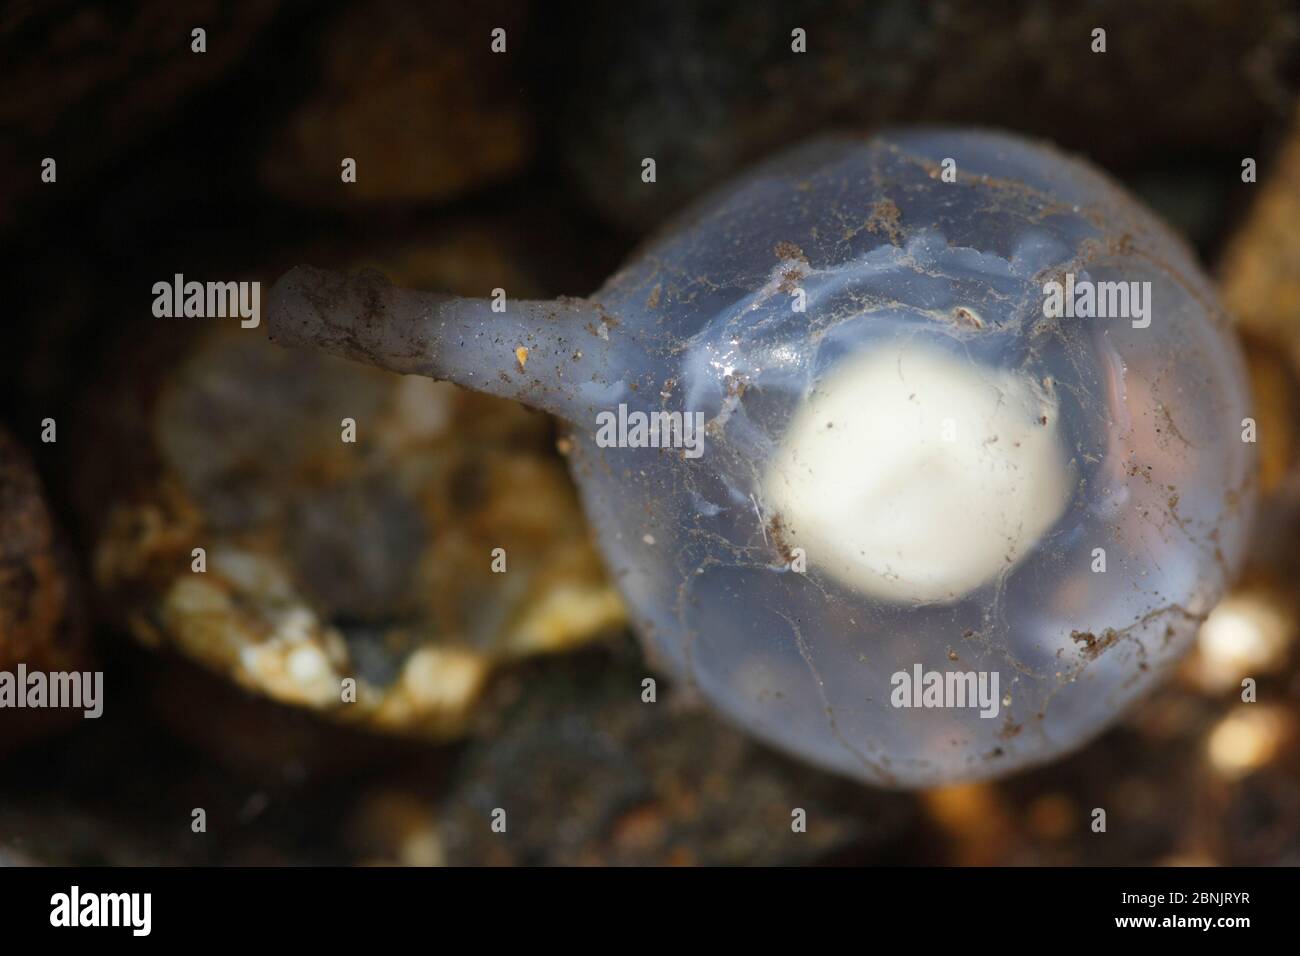 Japanese giant salamander (Andrias japonicus) egg which has accidentally been removed from the nest, Honshu, Japan, August. Stock Photo